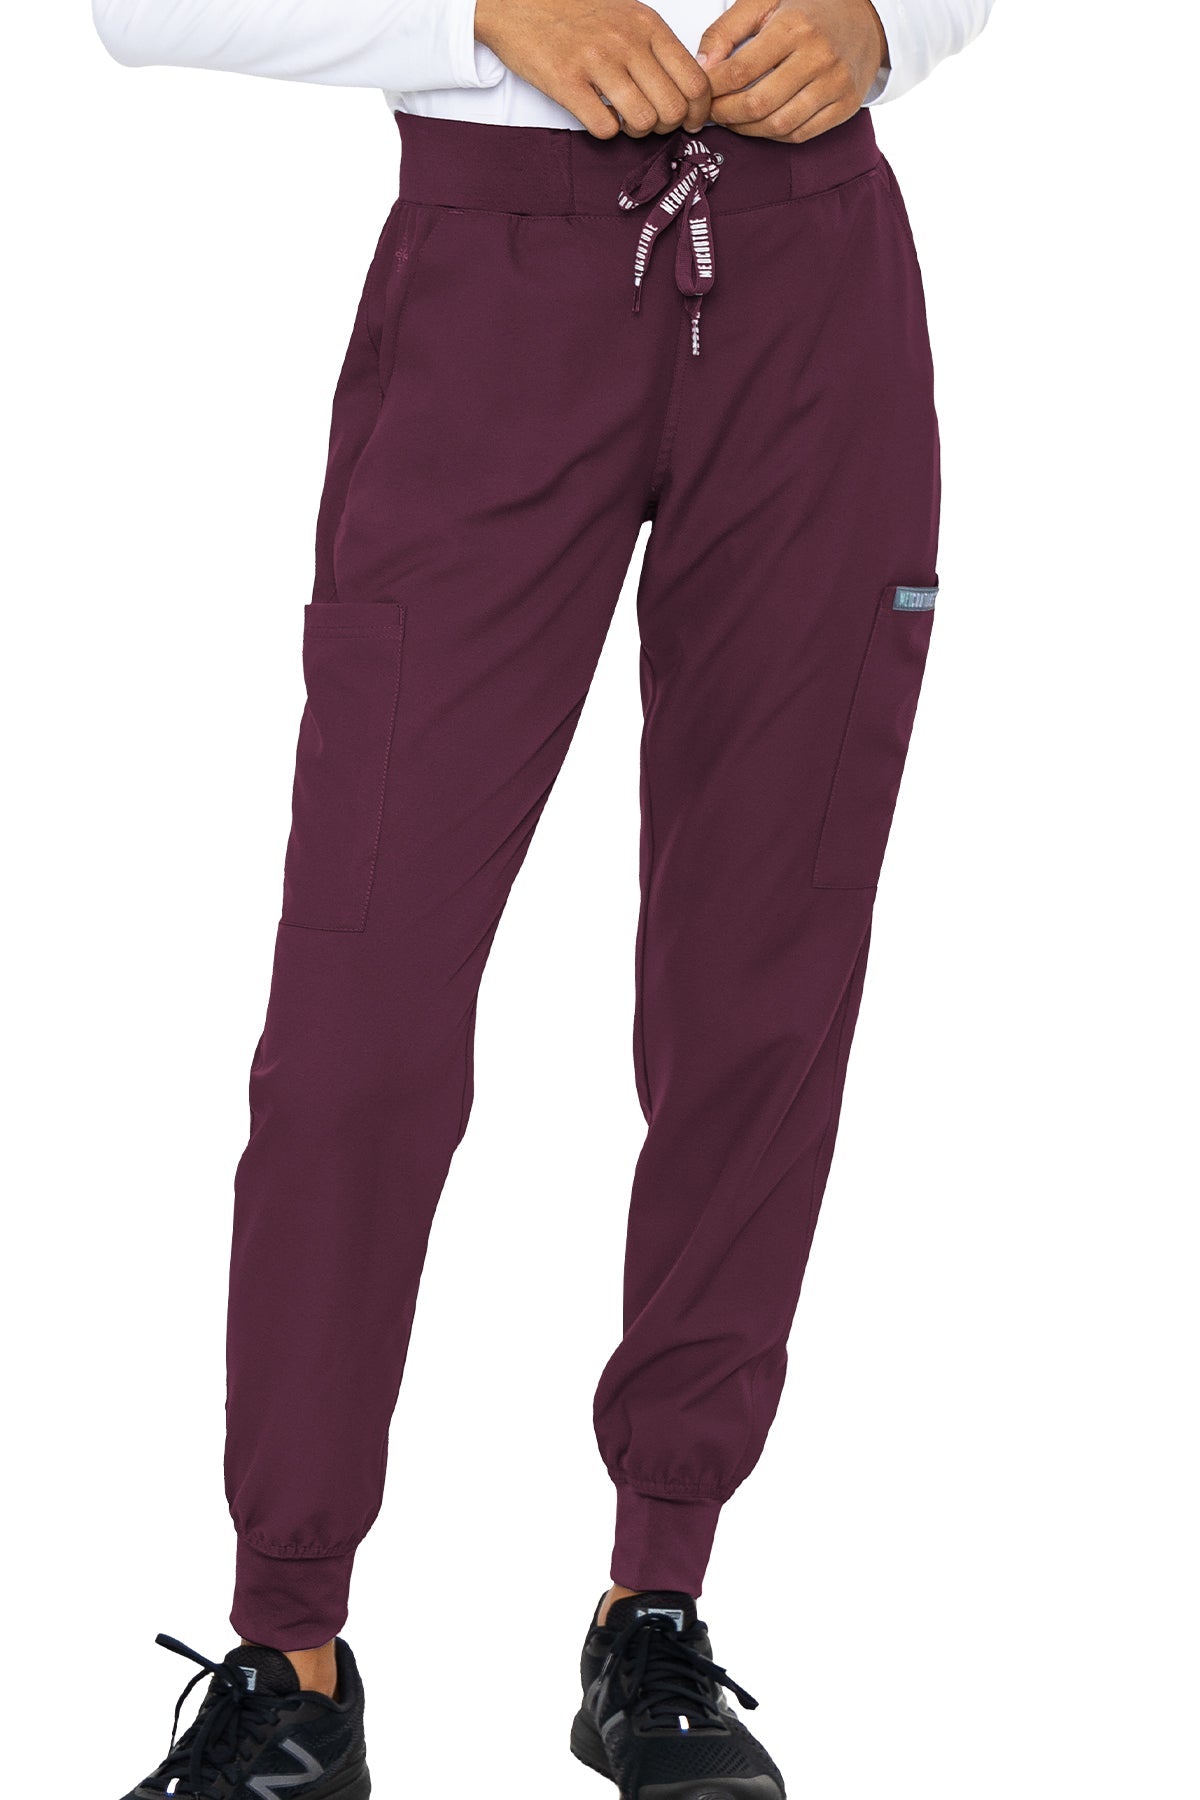 Med Couture Petite Scrub Pants Insight Jogger Pant in Wine at Parker's Clothing and Shoes.